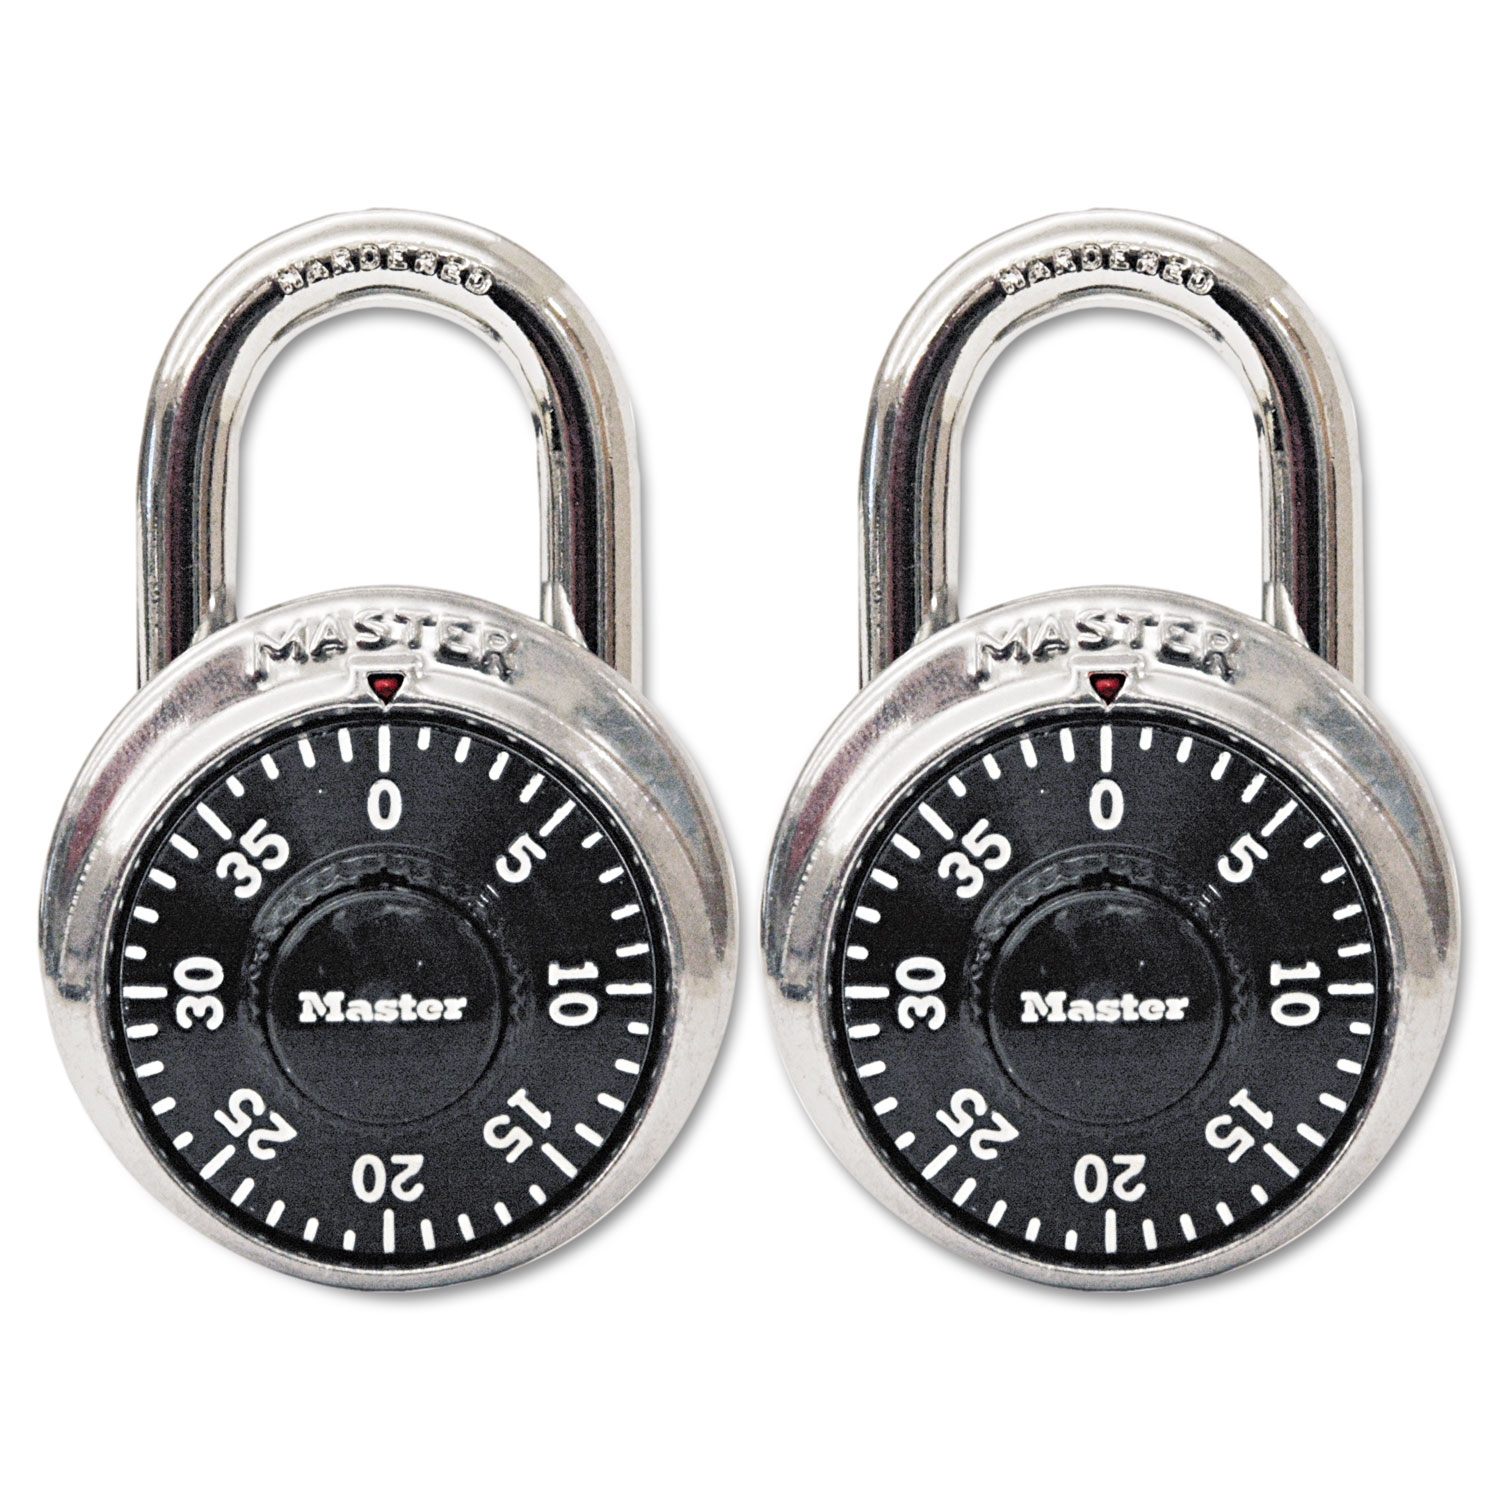  Master Lock 1500-T Combination Lock, Stainless Steel, 1 7/8 Wide, Black Dial, 2/Pack (MLK1500T) 